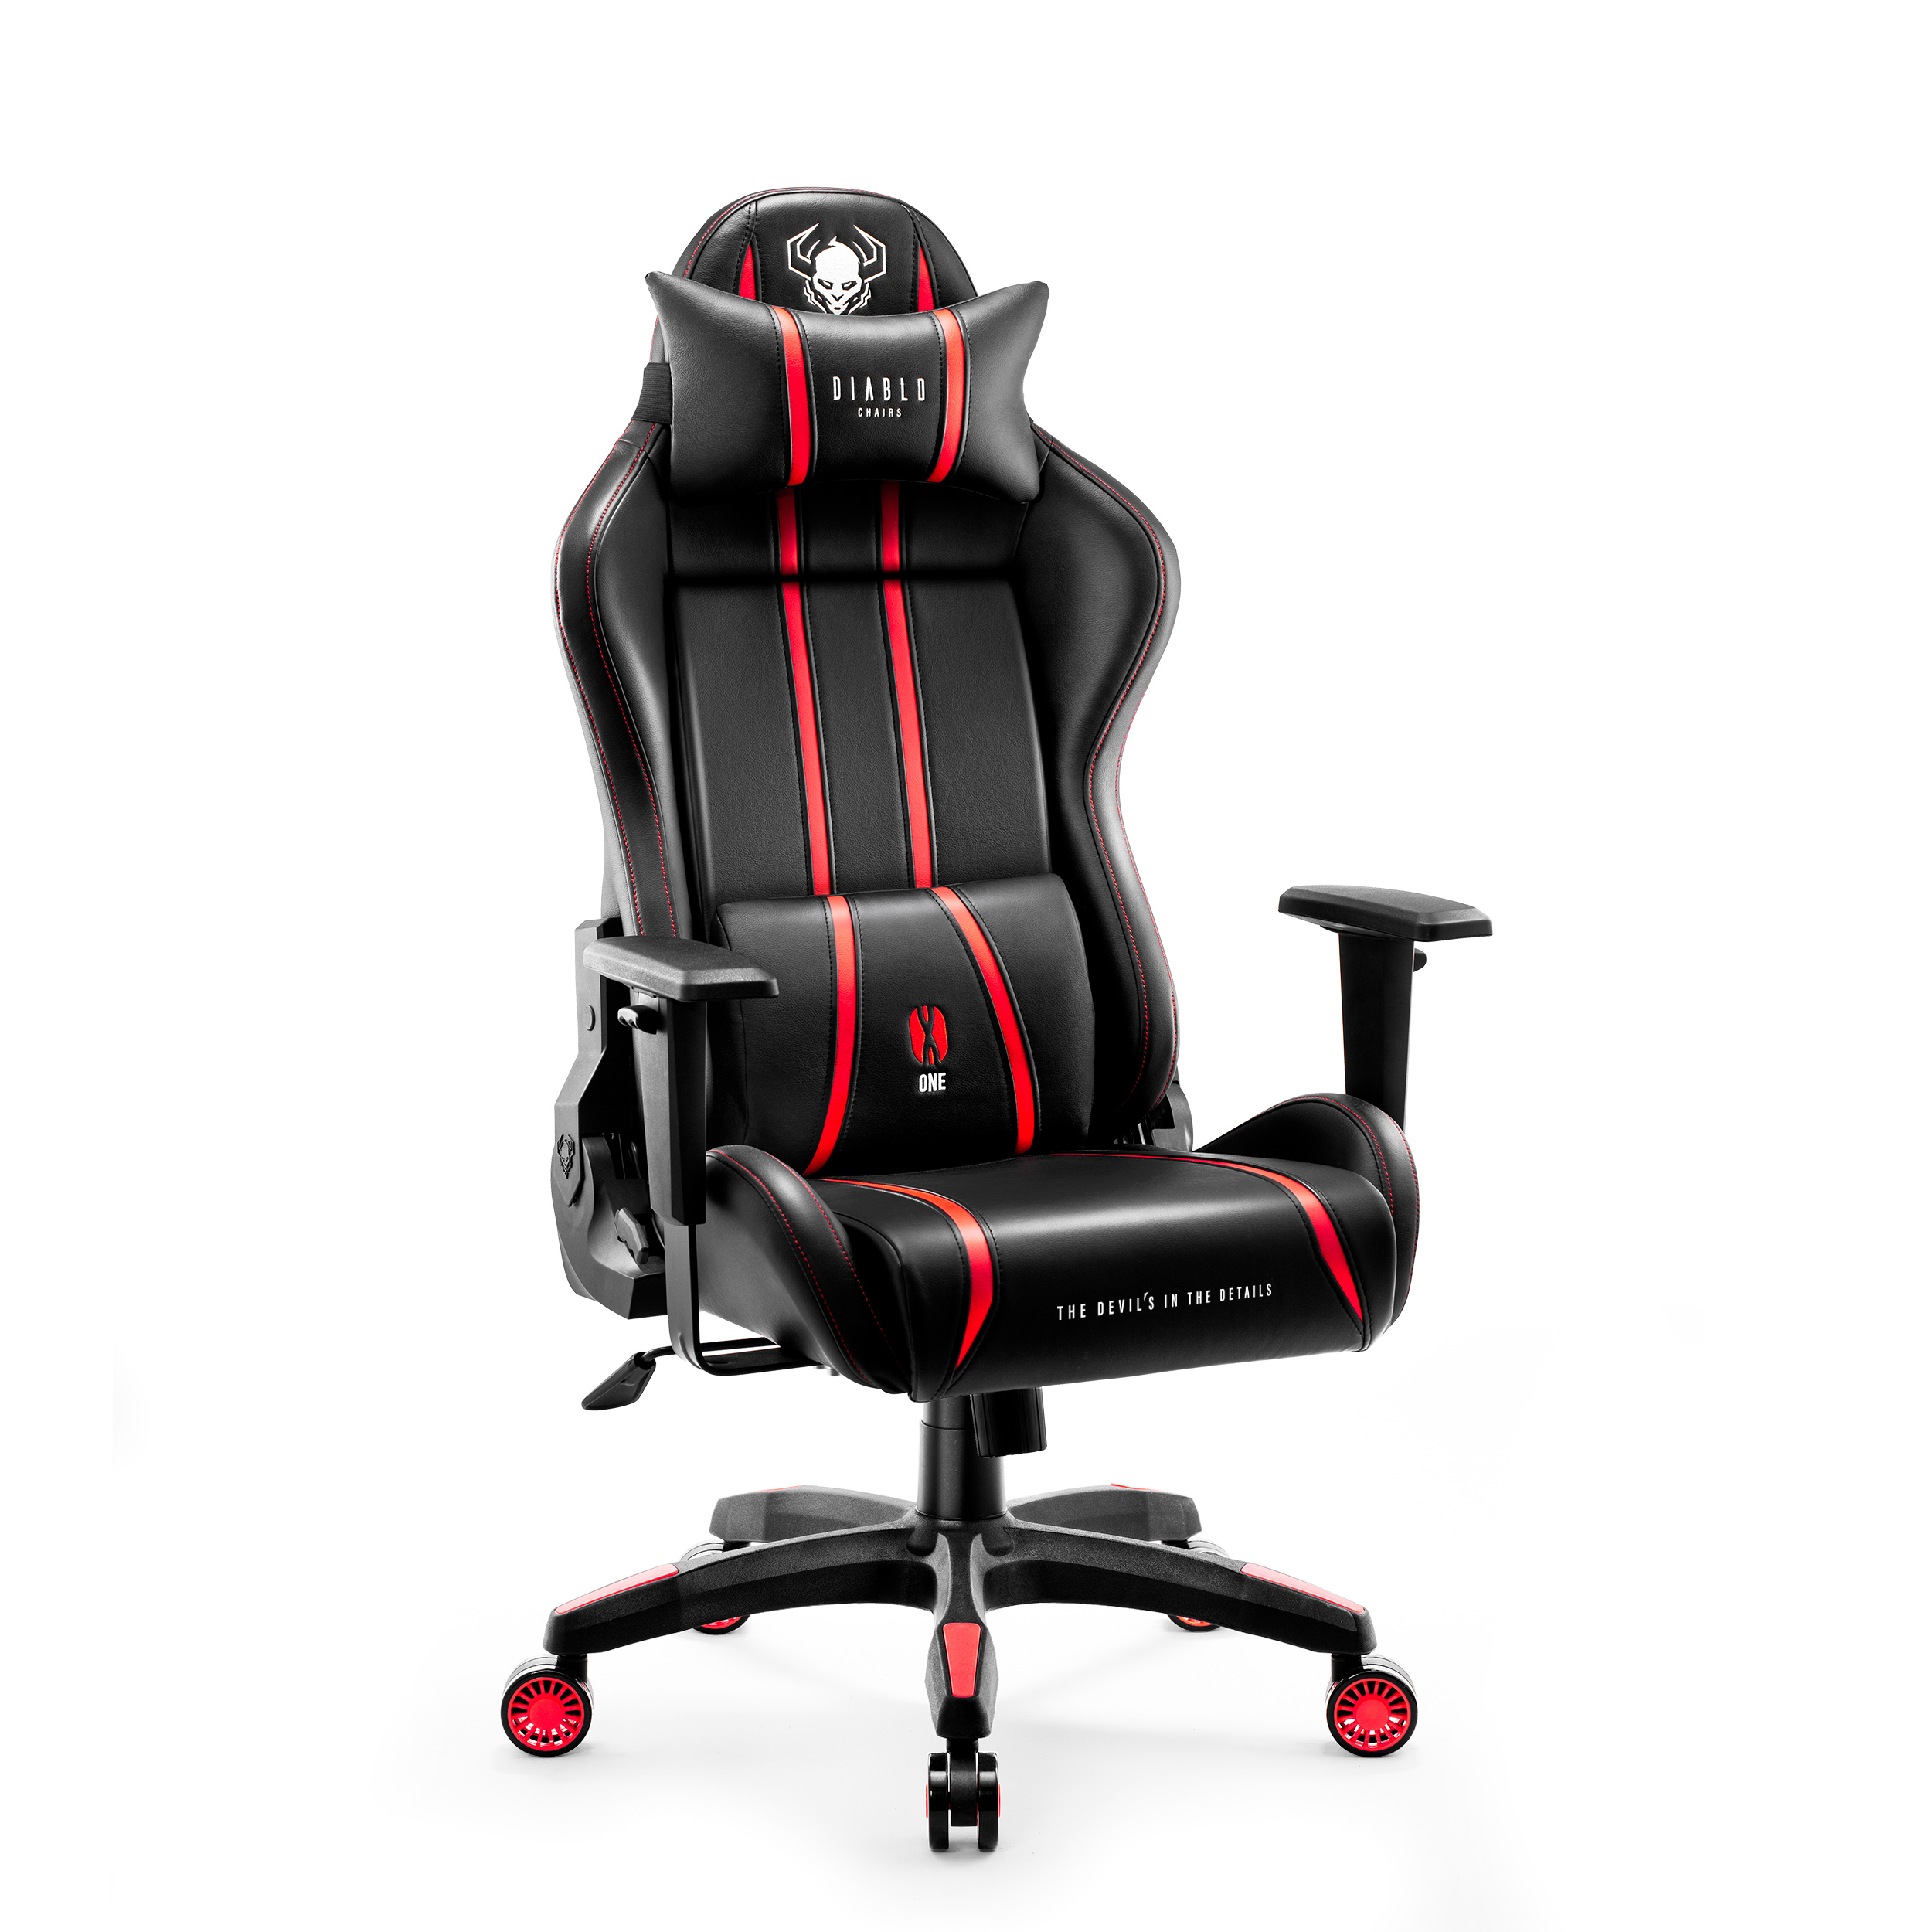 DIABLO CHAIRS GAMING STUHL X-ONE 2.0 black/red NORMAL Chair, Gaming